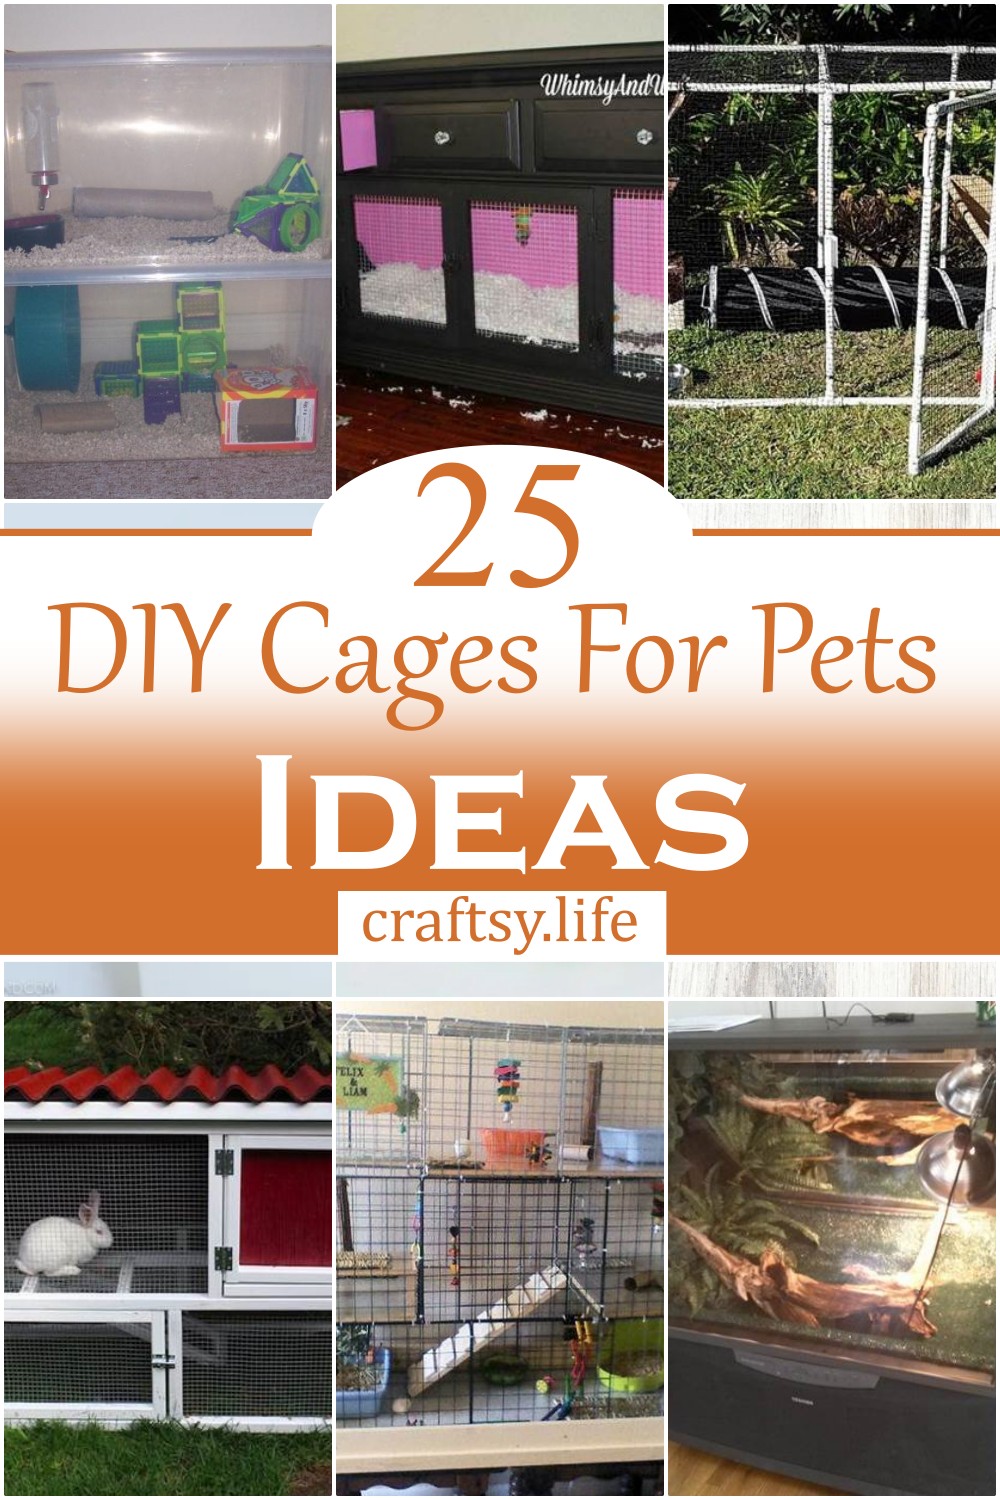 DIY Cages For Pets Ideas